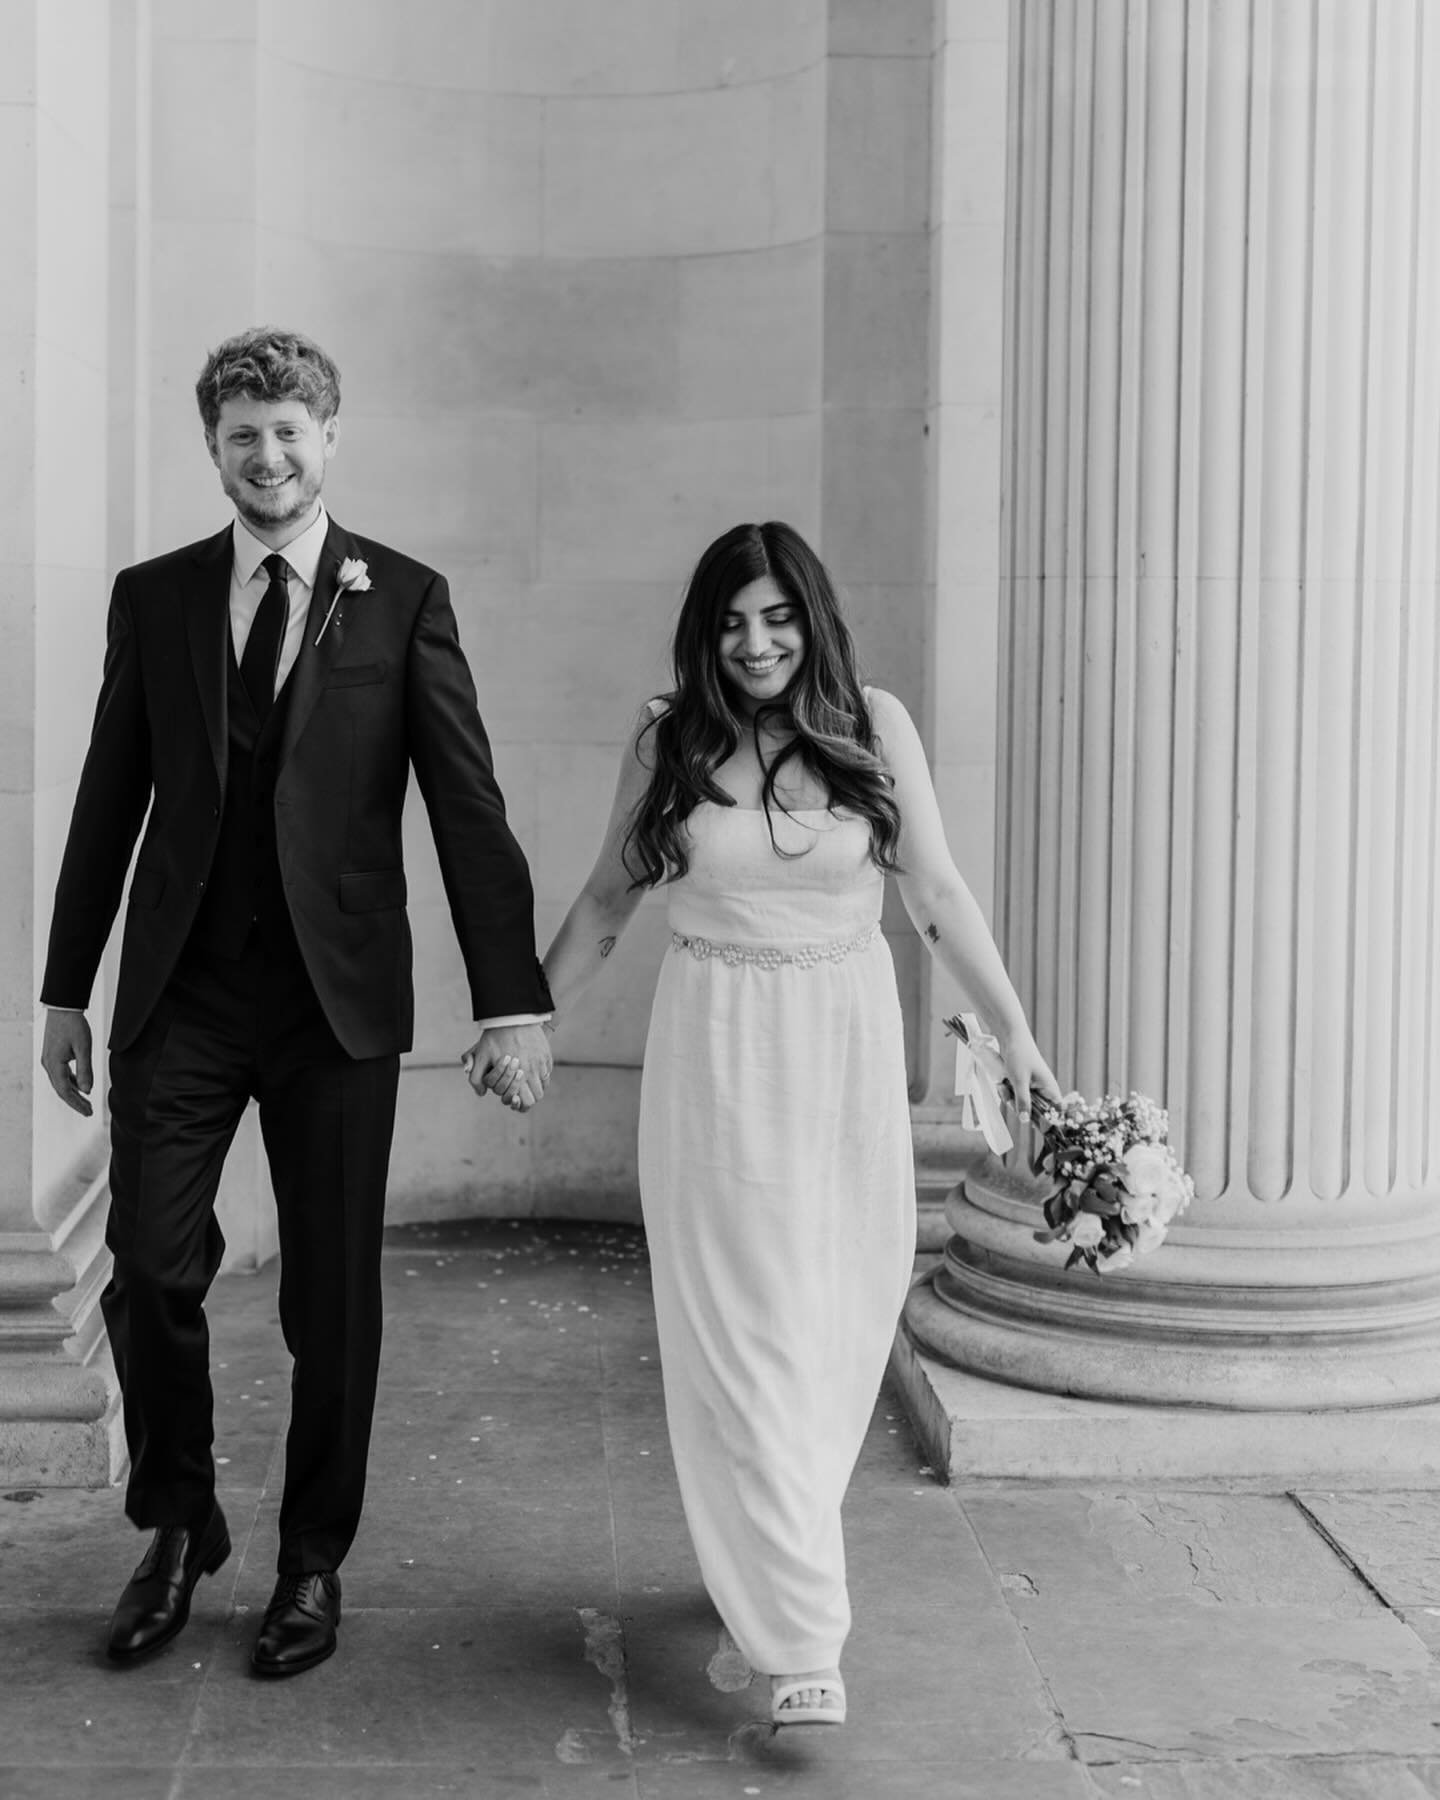 Congratulations to the lovely Nikita &amp; Jacob! They married last Friday on a glorious sunny spring day at the Old Marylebone Town Hall surrounded by their closest family. We had a lovely time walking around town in the warm sunshine, finishing off